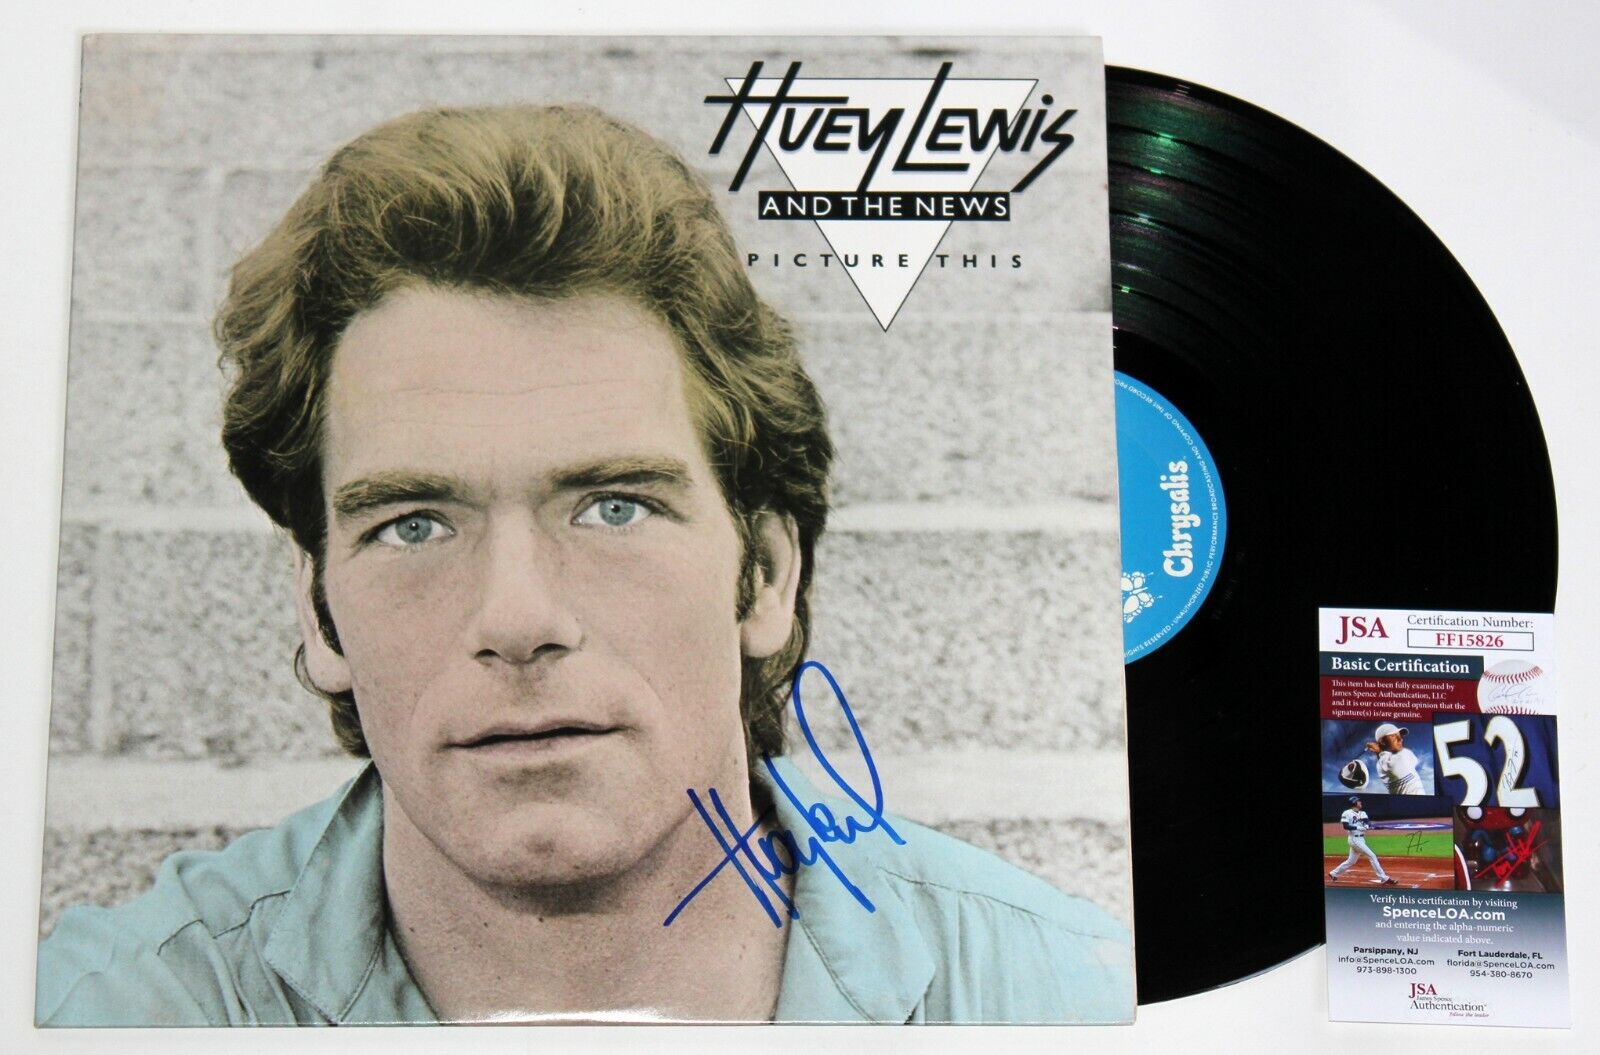 HUEY LEWIS SIGNED PICTURE THIS LP VINYL RECORD AND THE NEWS AUTOGRAPHED +JSA COA